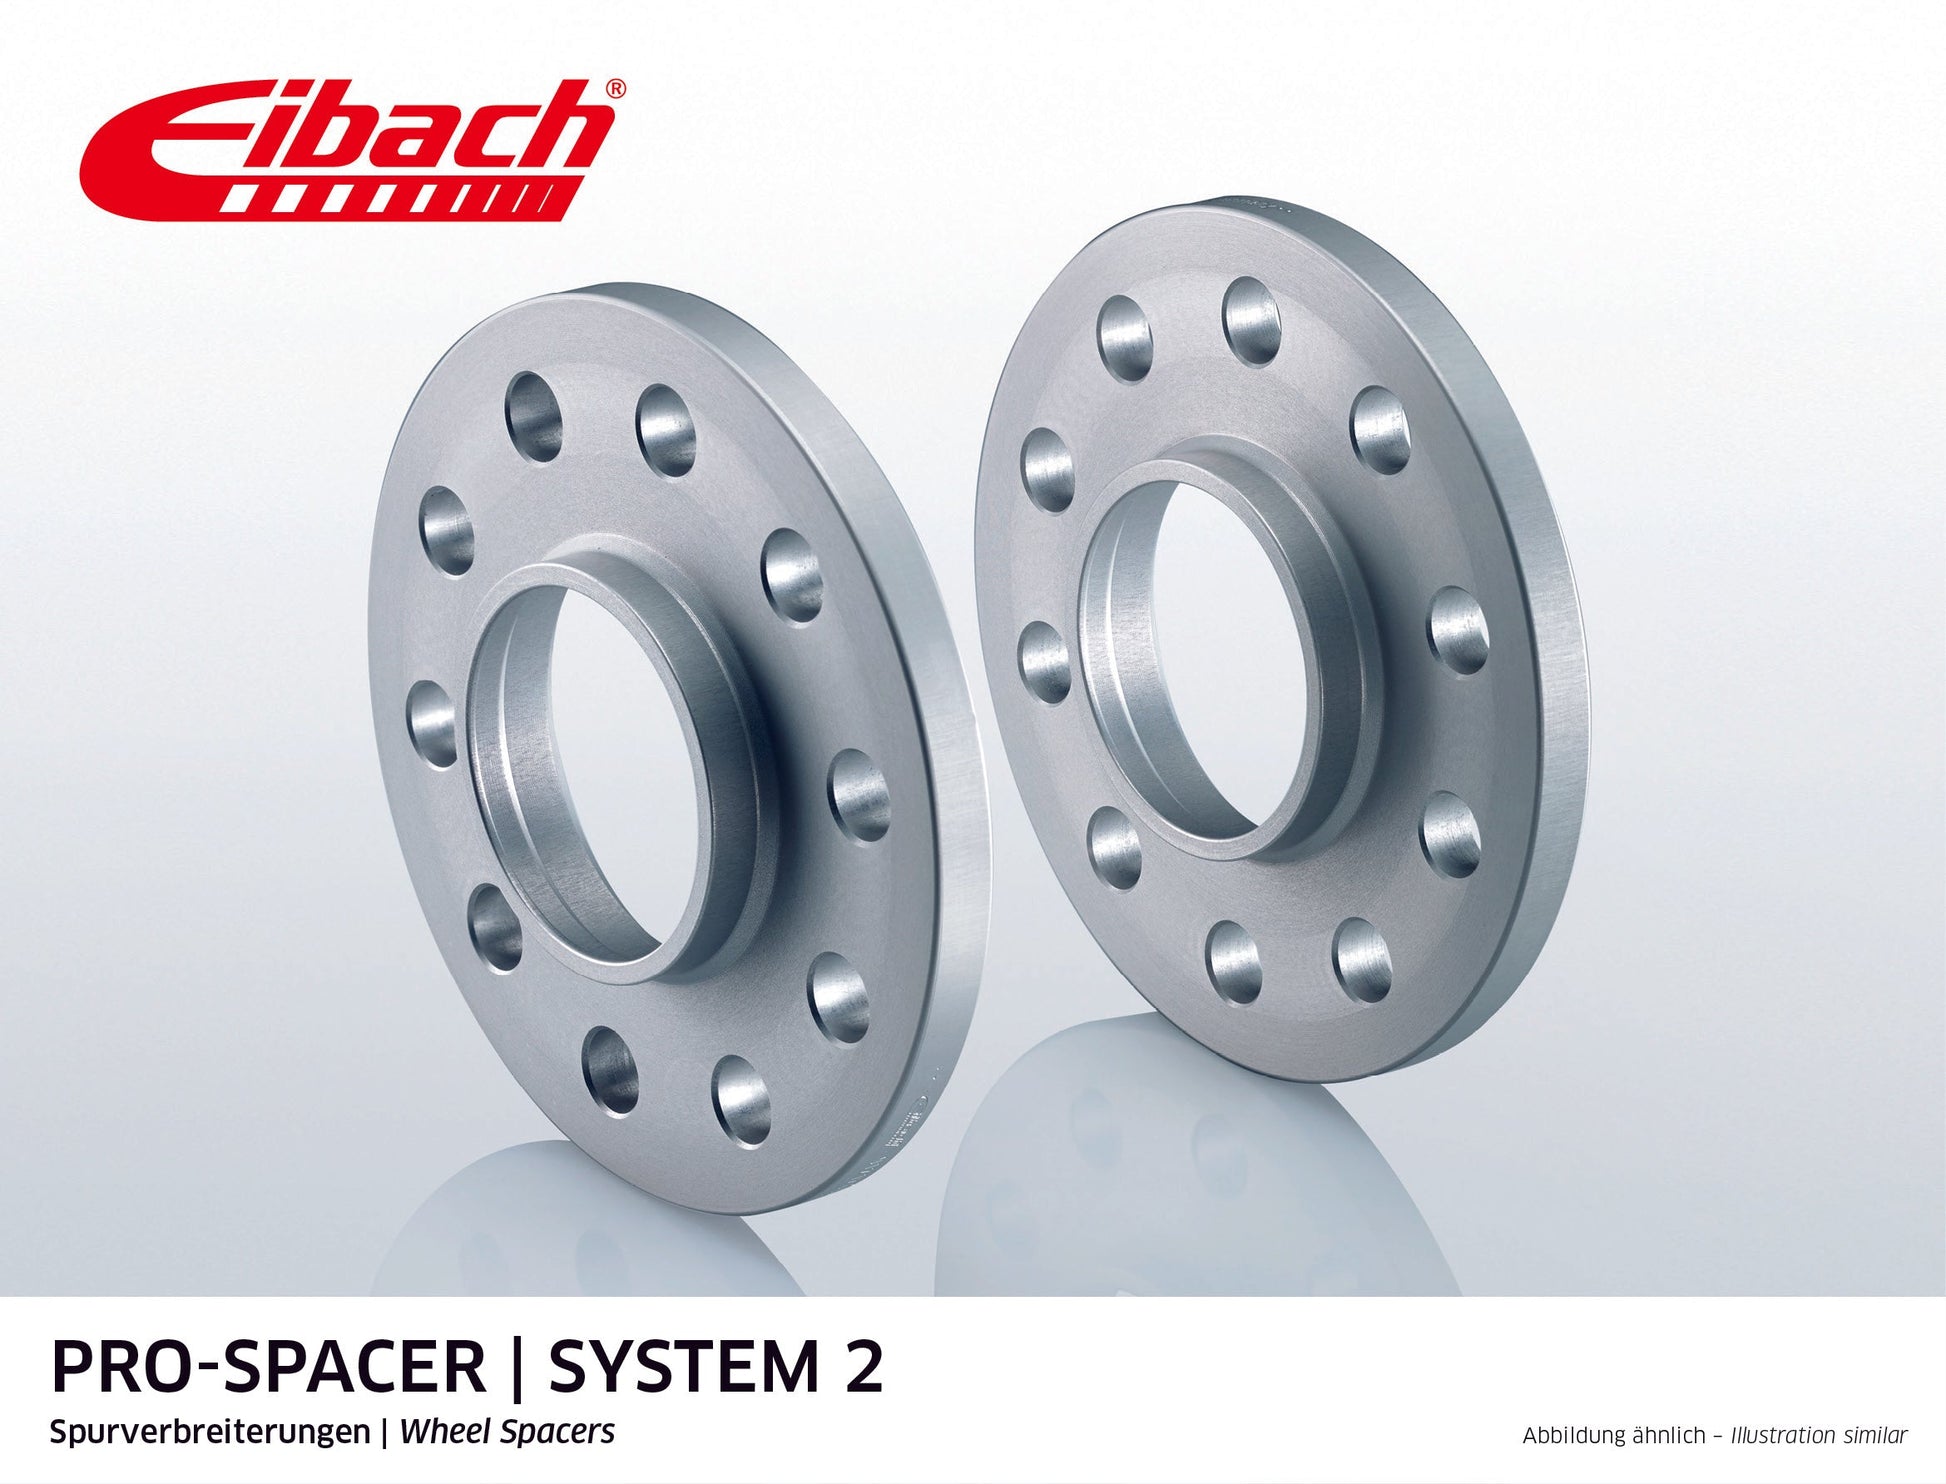 Eibach Pro-Spacer Kit (Pair Of Spacers) 15mm Per Spacer (System 2) S90-2-15-004 (Silver) at £118.84